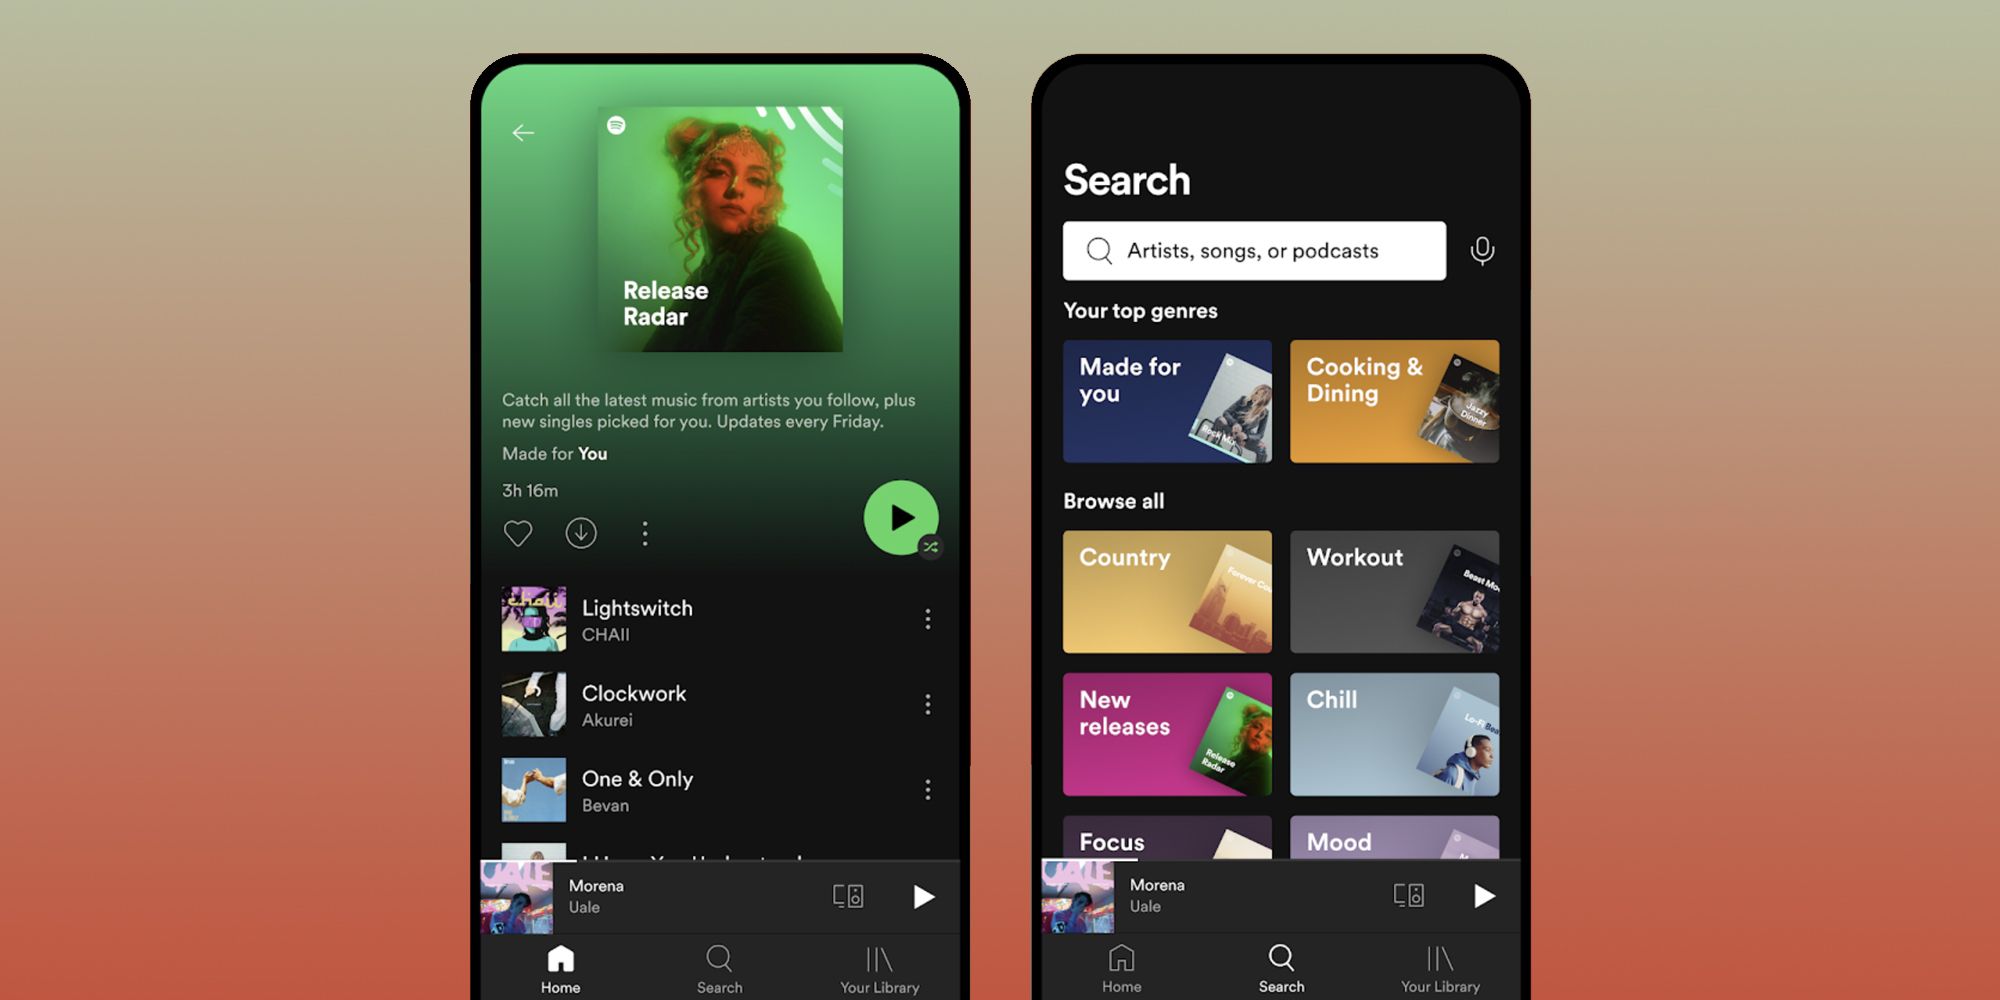 spotify phones release radar and search